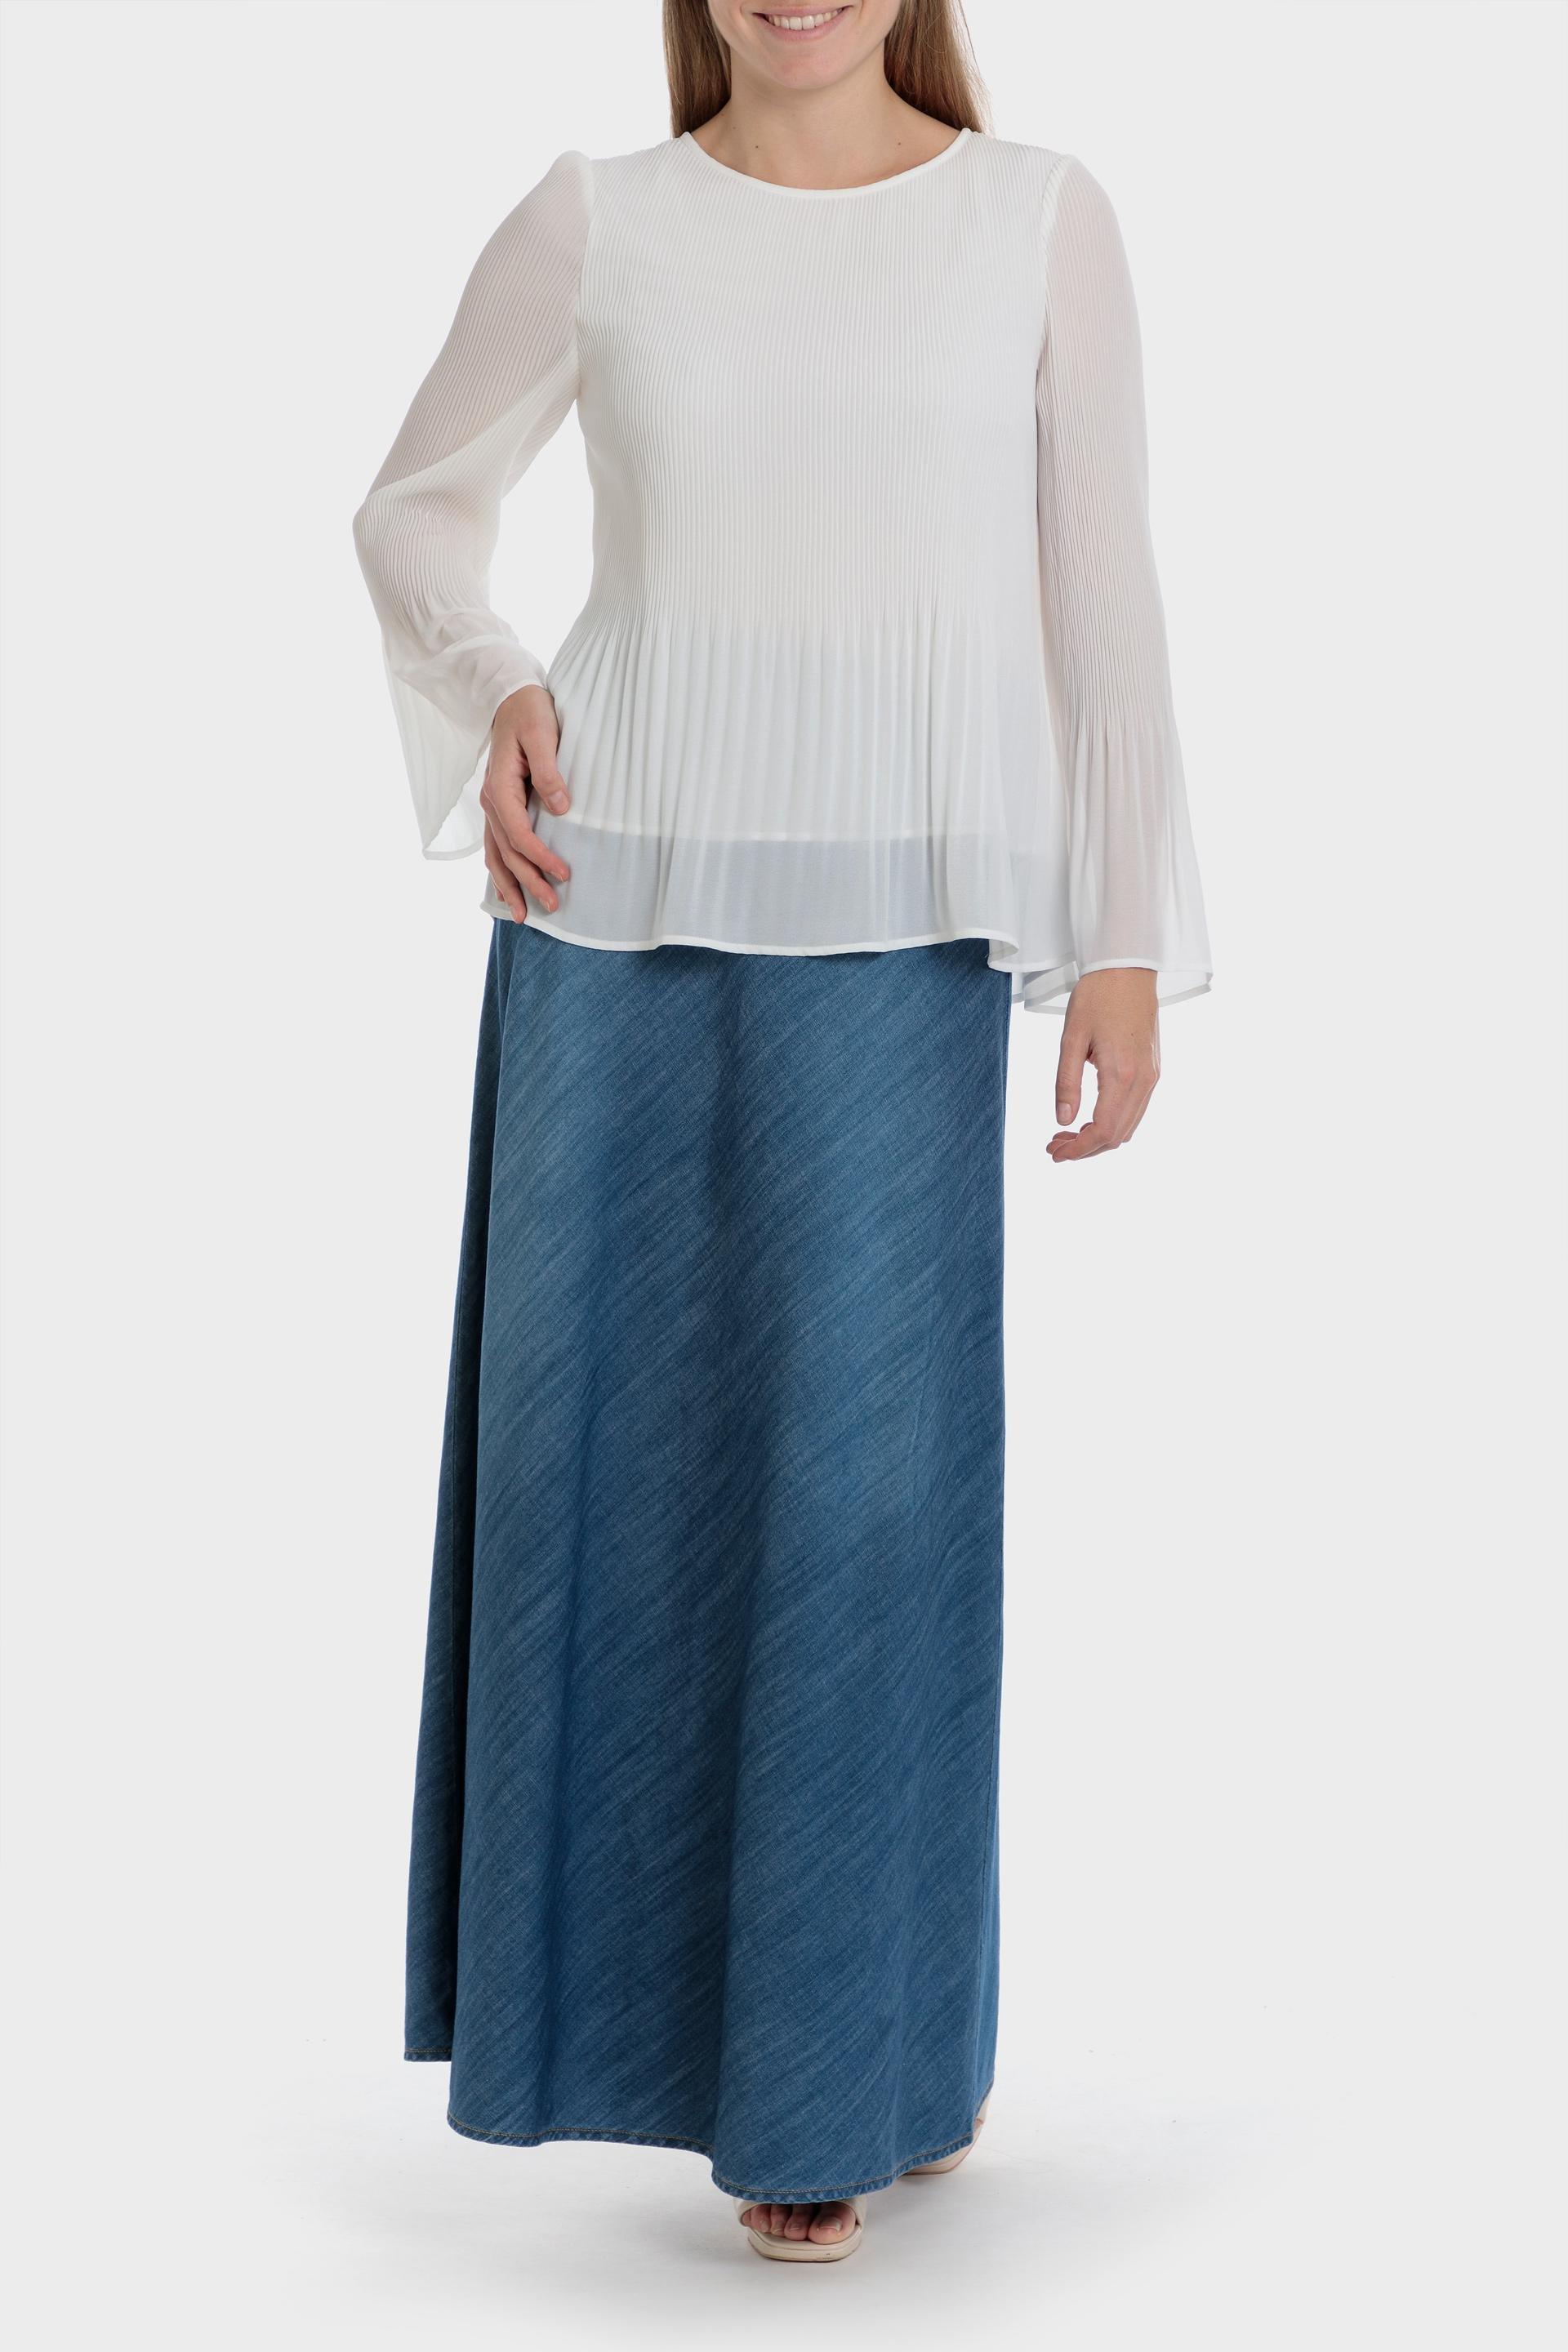 Punt Roma - White Pleated Loose Fitting Blouse